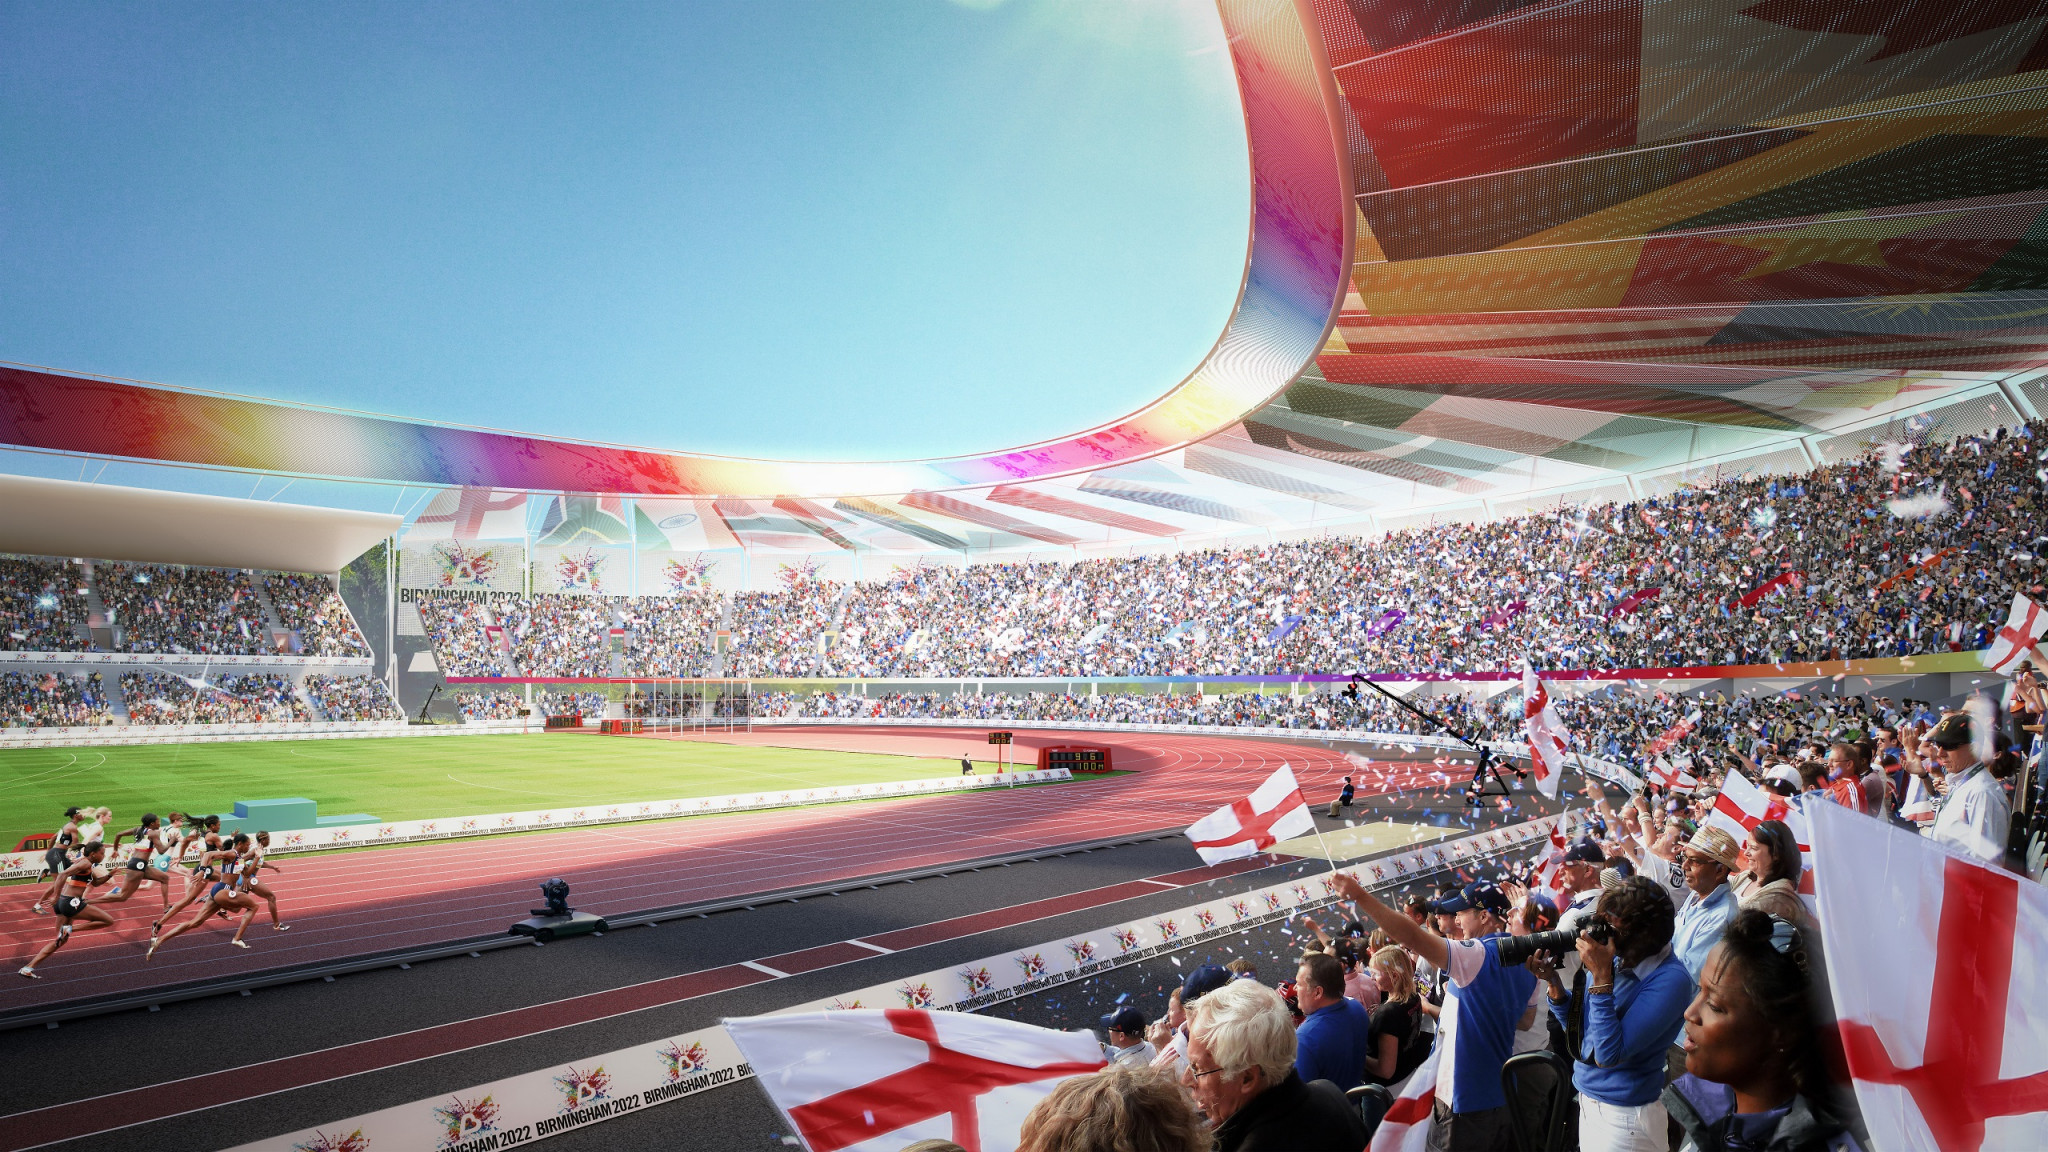 Alexander Stadium will be revamped for Birmingham 2022 and be the centrepiece of the Commonwealth Games ©Birmingham 2022